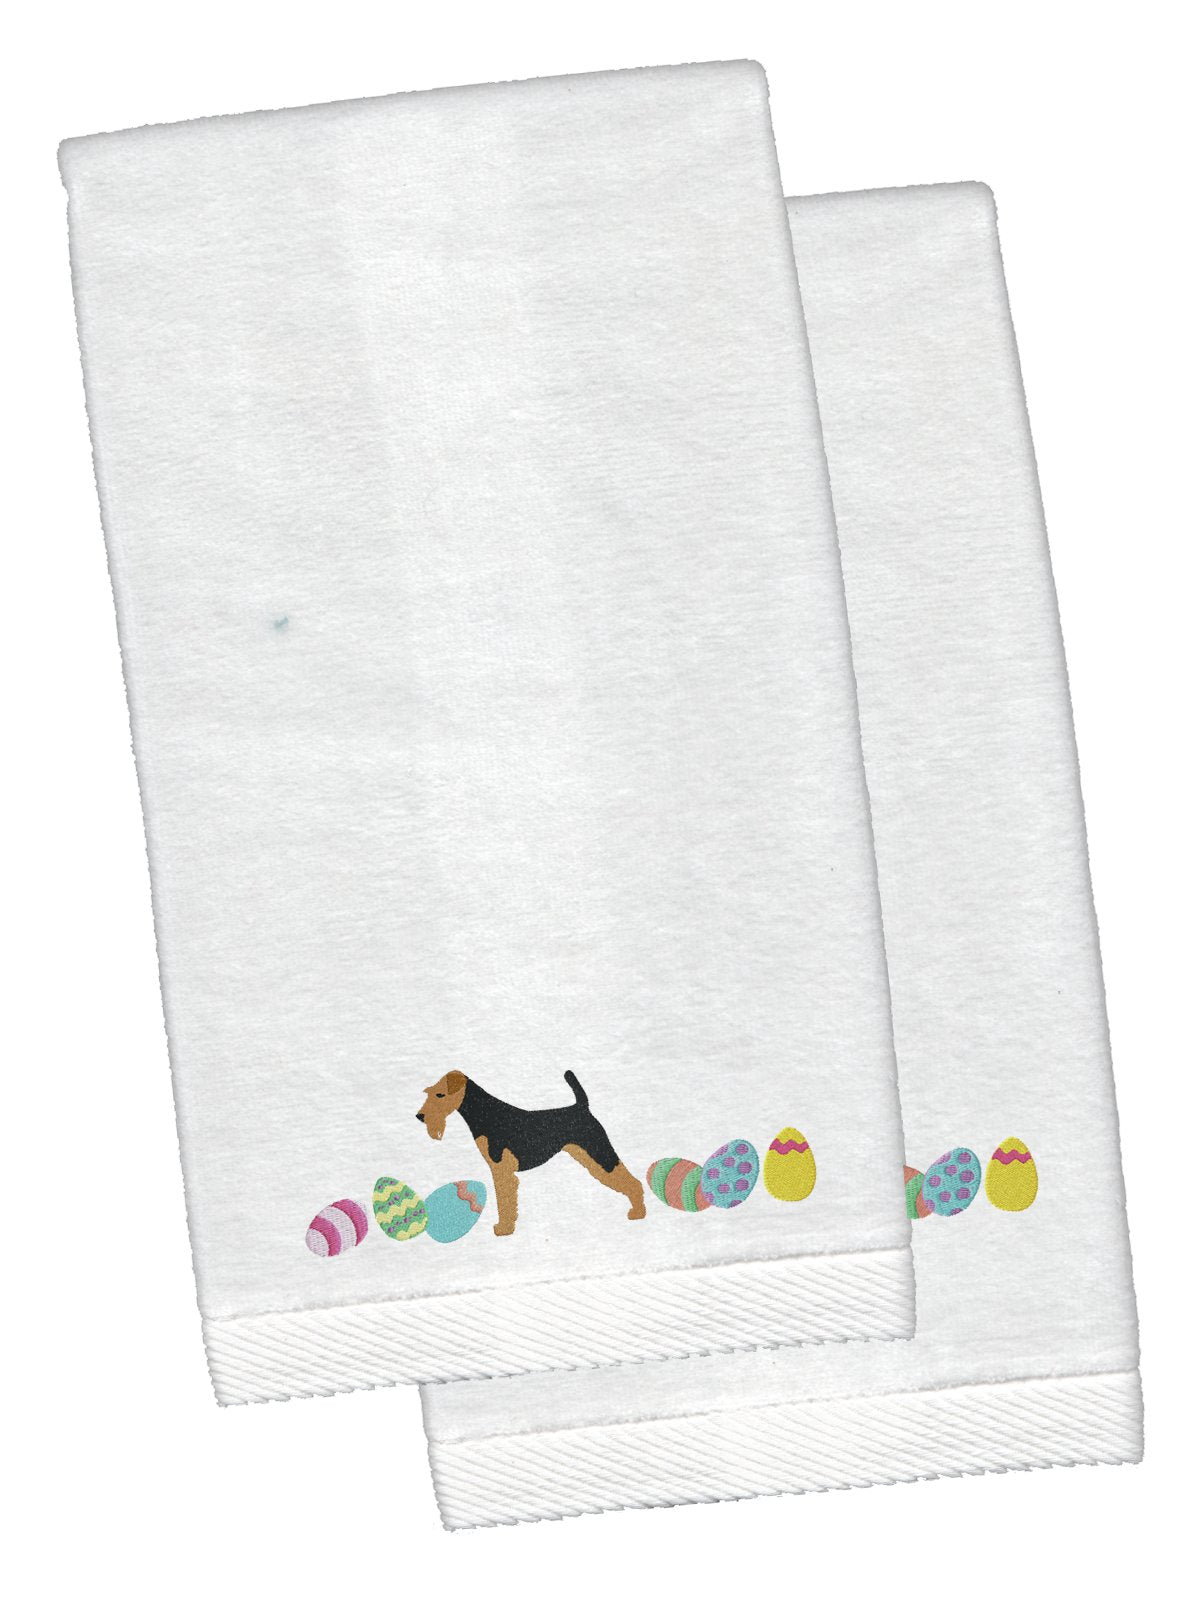 Airedale Terrier Easter White Embroidered Plush Hand Towel Set of 2 CK1594KTEMB by Caroline's Treasures